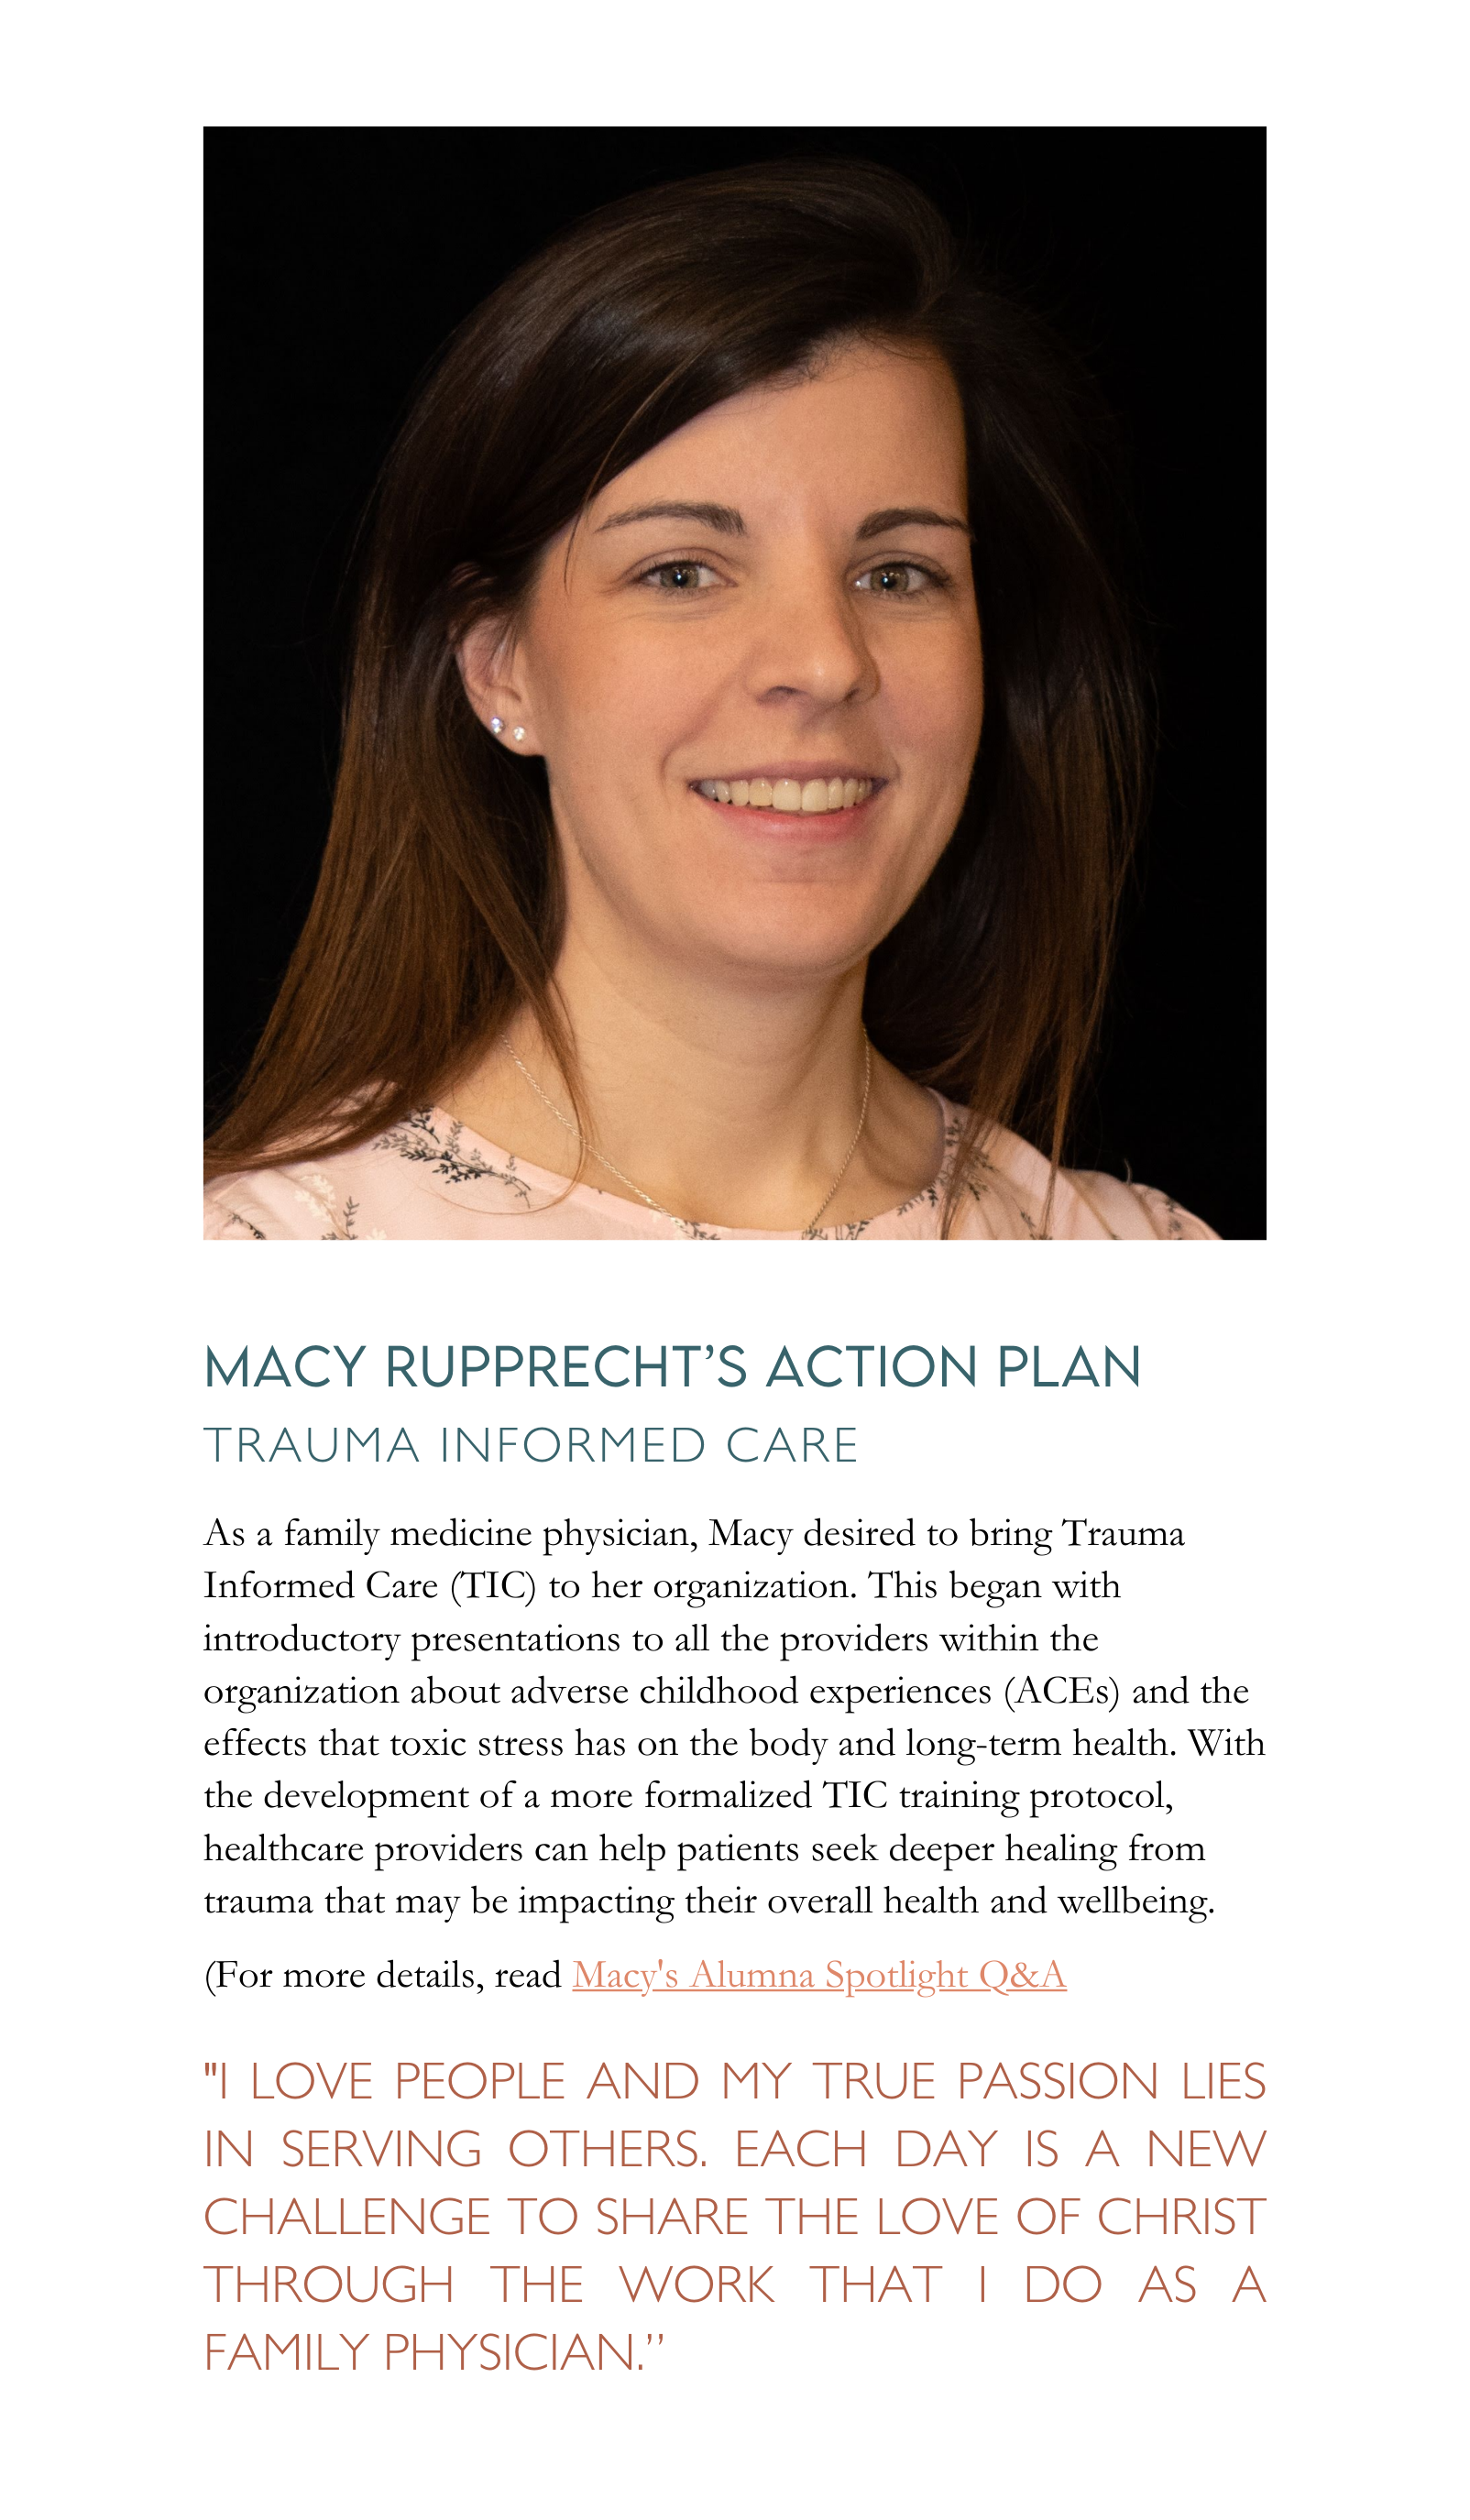 As a family medicine physician, Macy desired to bring Trauma Informed Care (TIC) to her organization. This began with introductory presentations to all the providers within the organization about adverse childhood experiences (ACEs) and the effects that toxic stress has on the body and long-term health. With the development of a more formalized TIC training protocol, healthcare providers can help patients seek deeper healing from trauma that may be impacting their overall health and wellbeing.